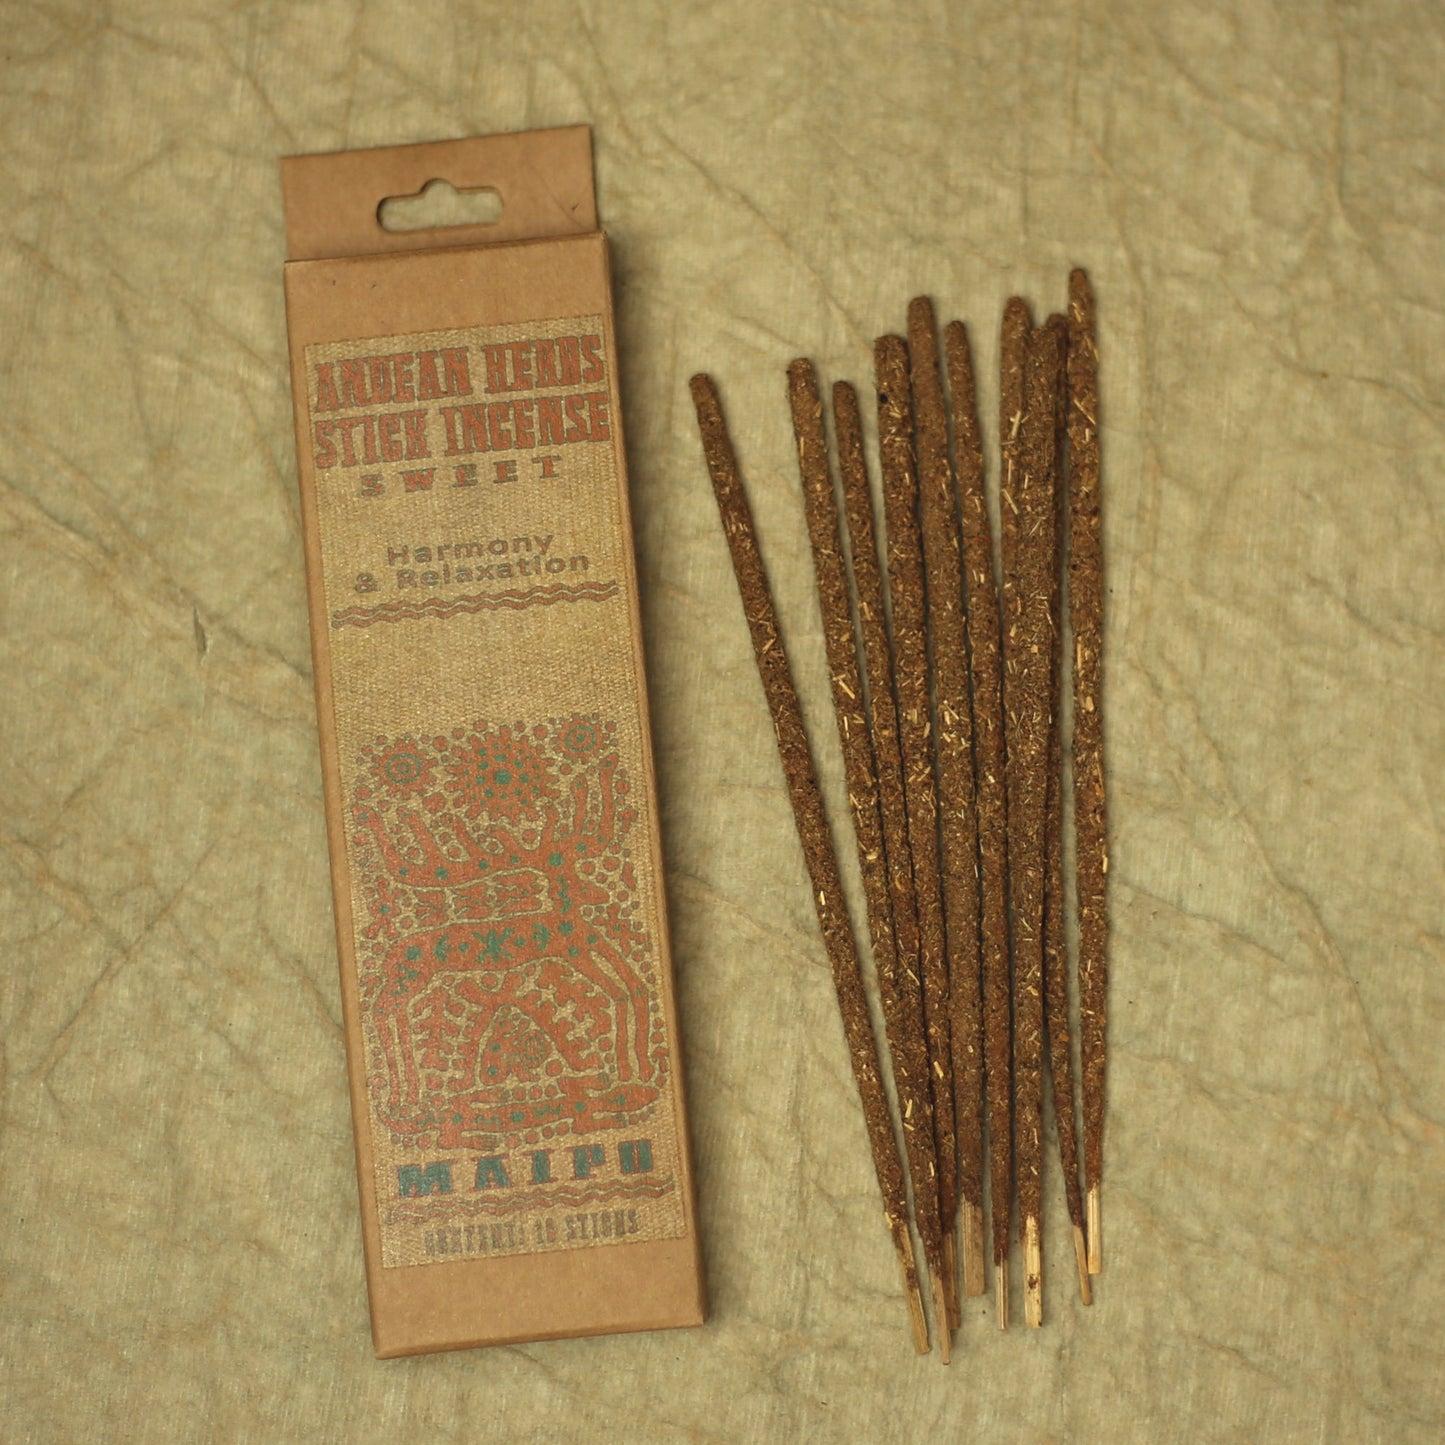 Smudging Incense - Sweet - Andean Herbs Incense Sticks - Harmony & Relaxation - Tree Spirit Wellness